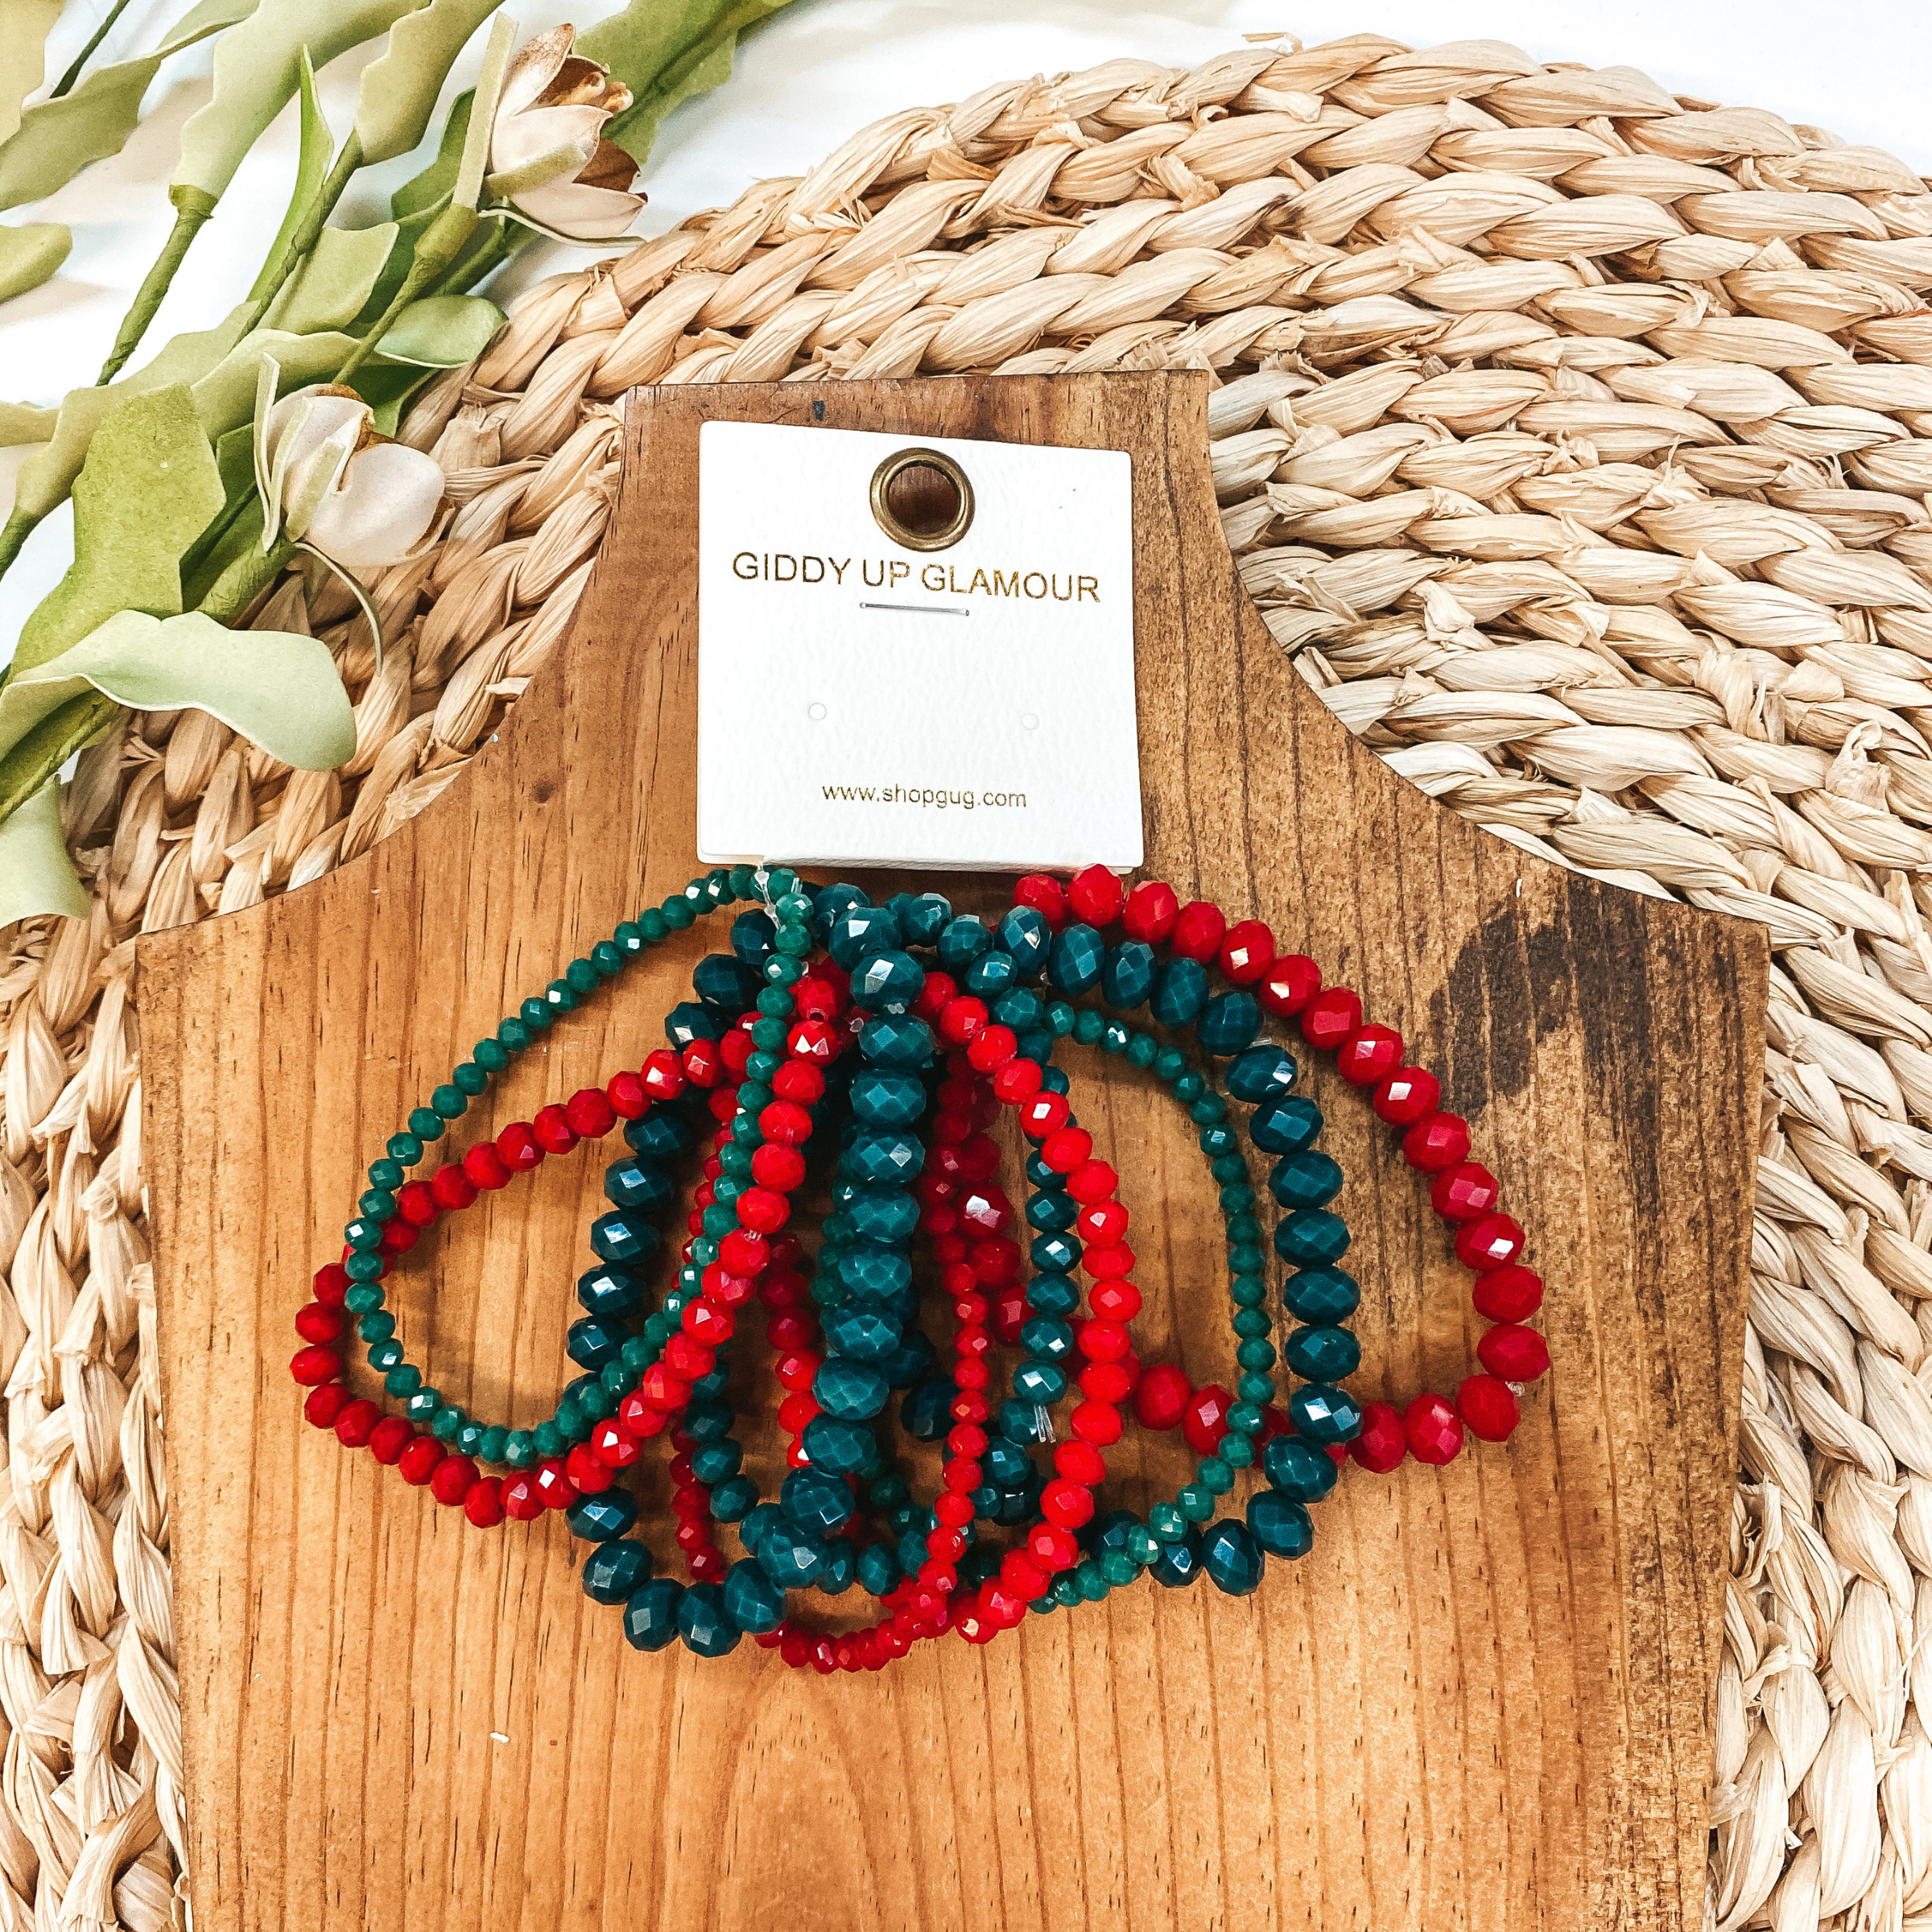 Nine Piece Crystal Bracelet Set in Green and Red - Giddy Up Glamour Boutique